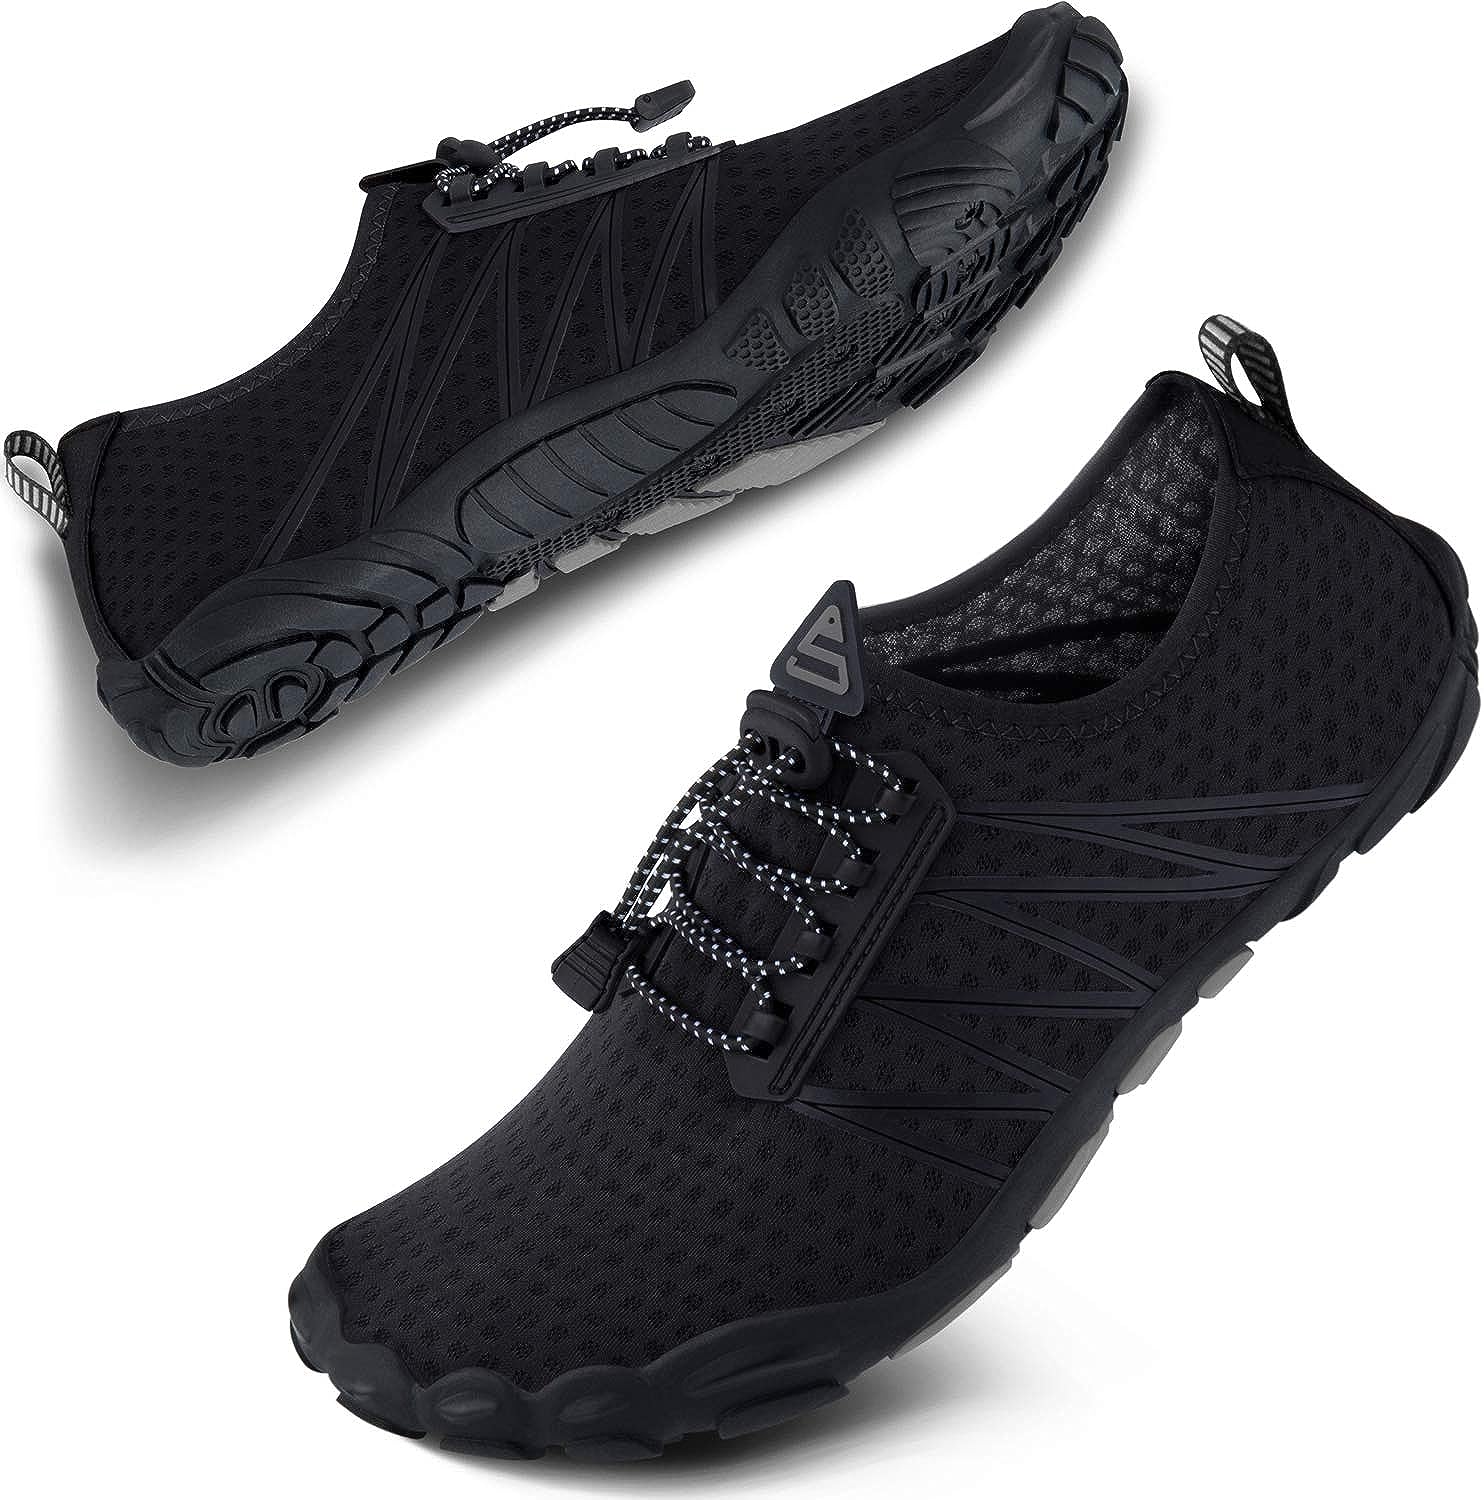 shoes for kayaking and hiking detailed review